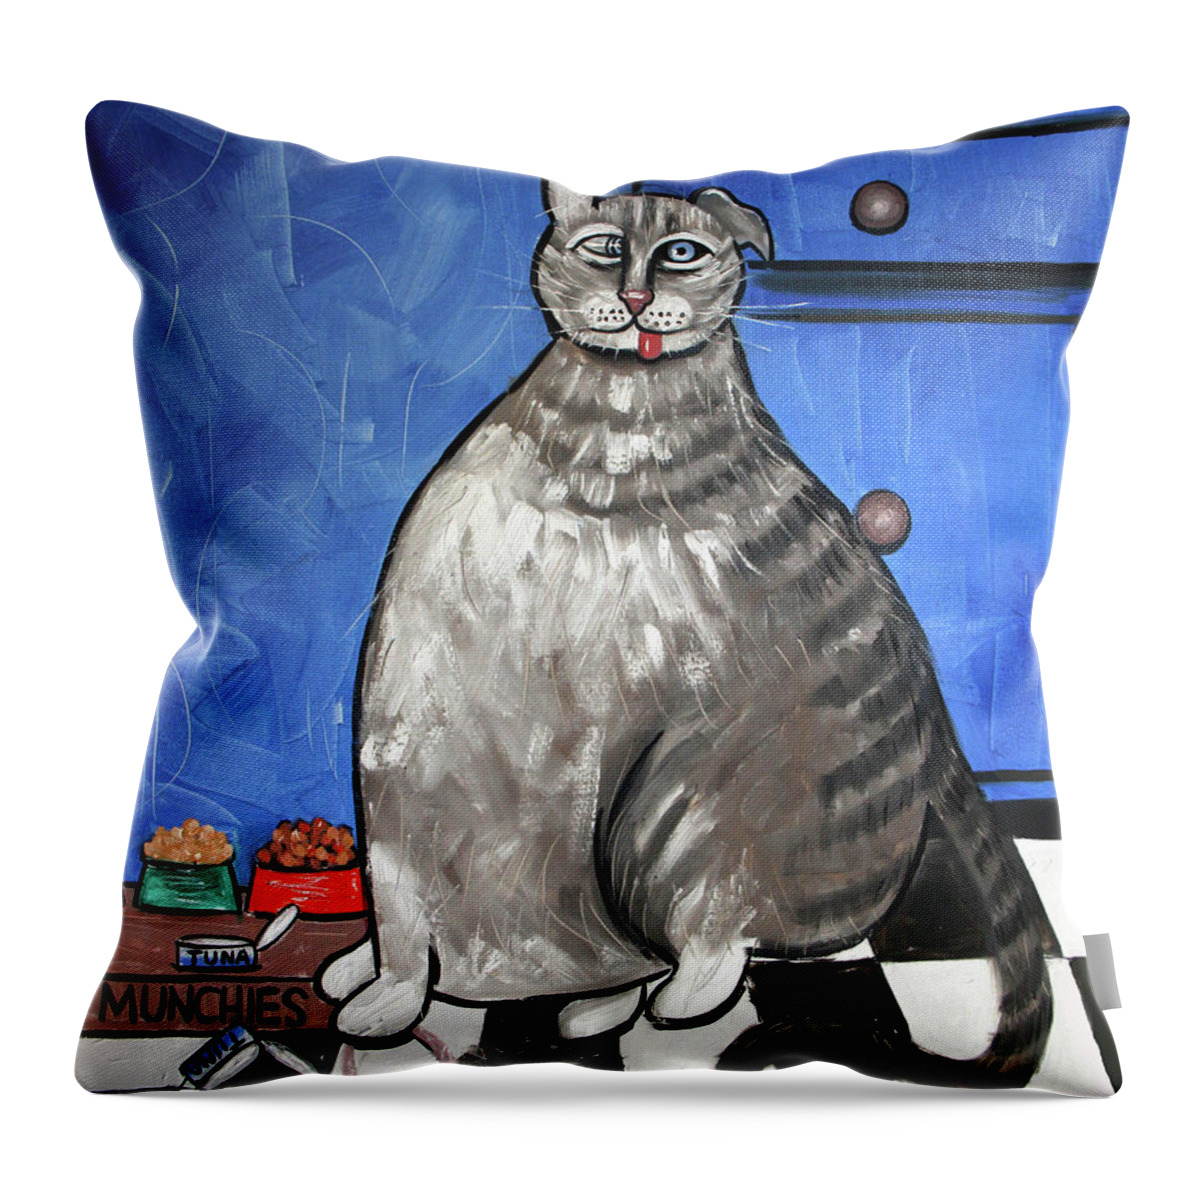  Abstract Throw Pillow featuring the painting My Fat Cat On Medical Catnip by Anthony Falbo